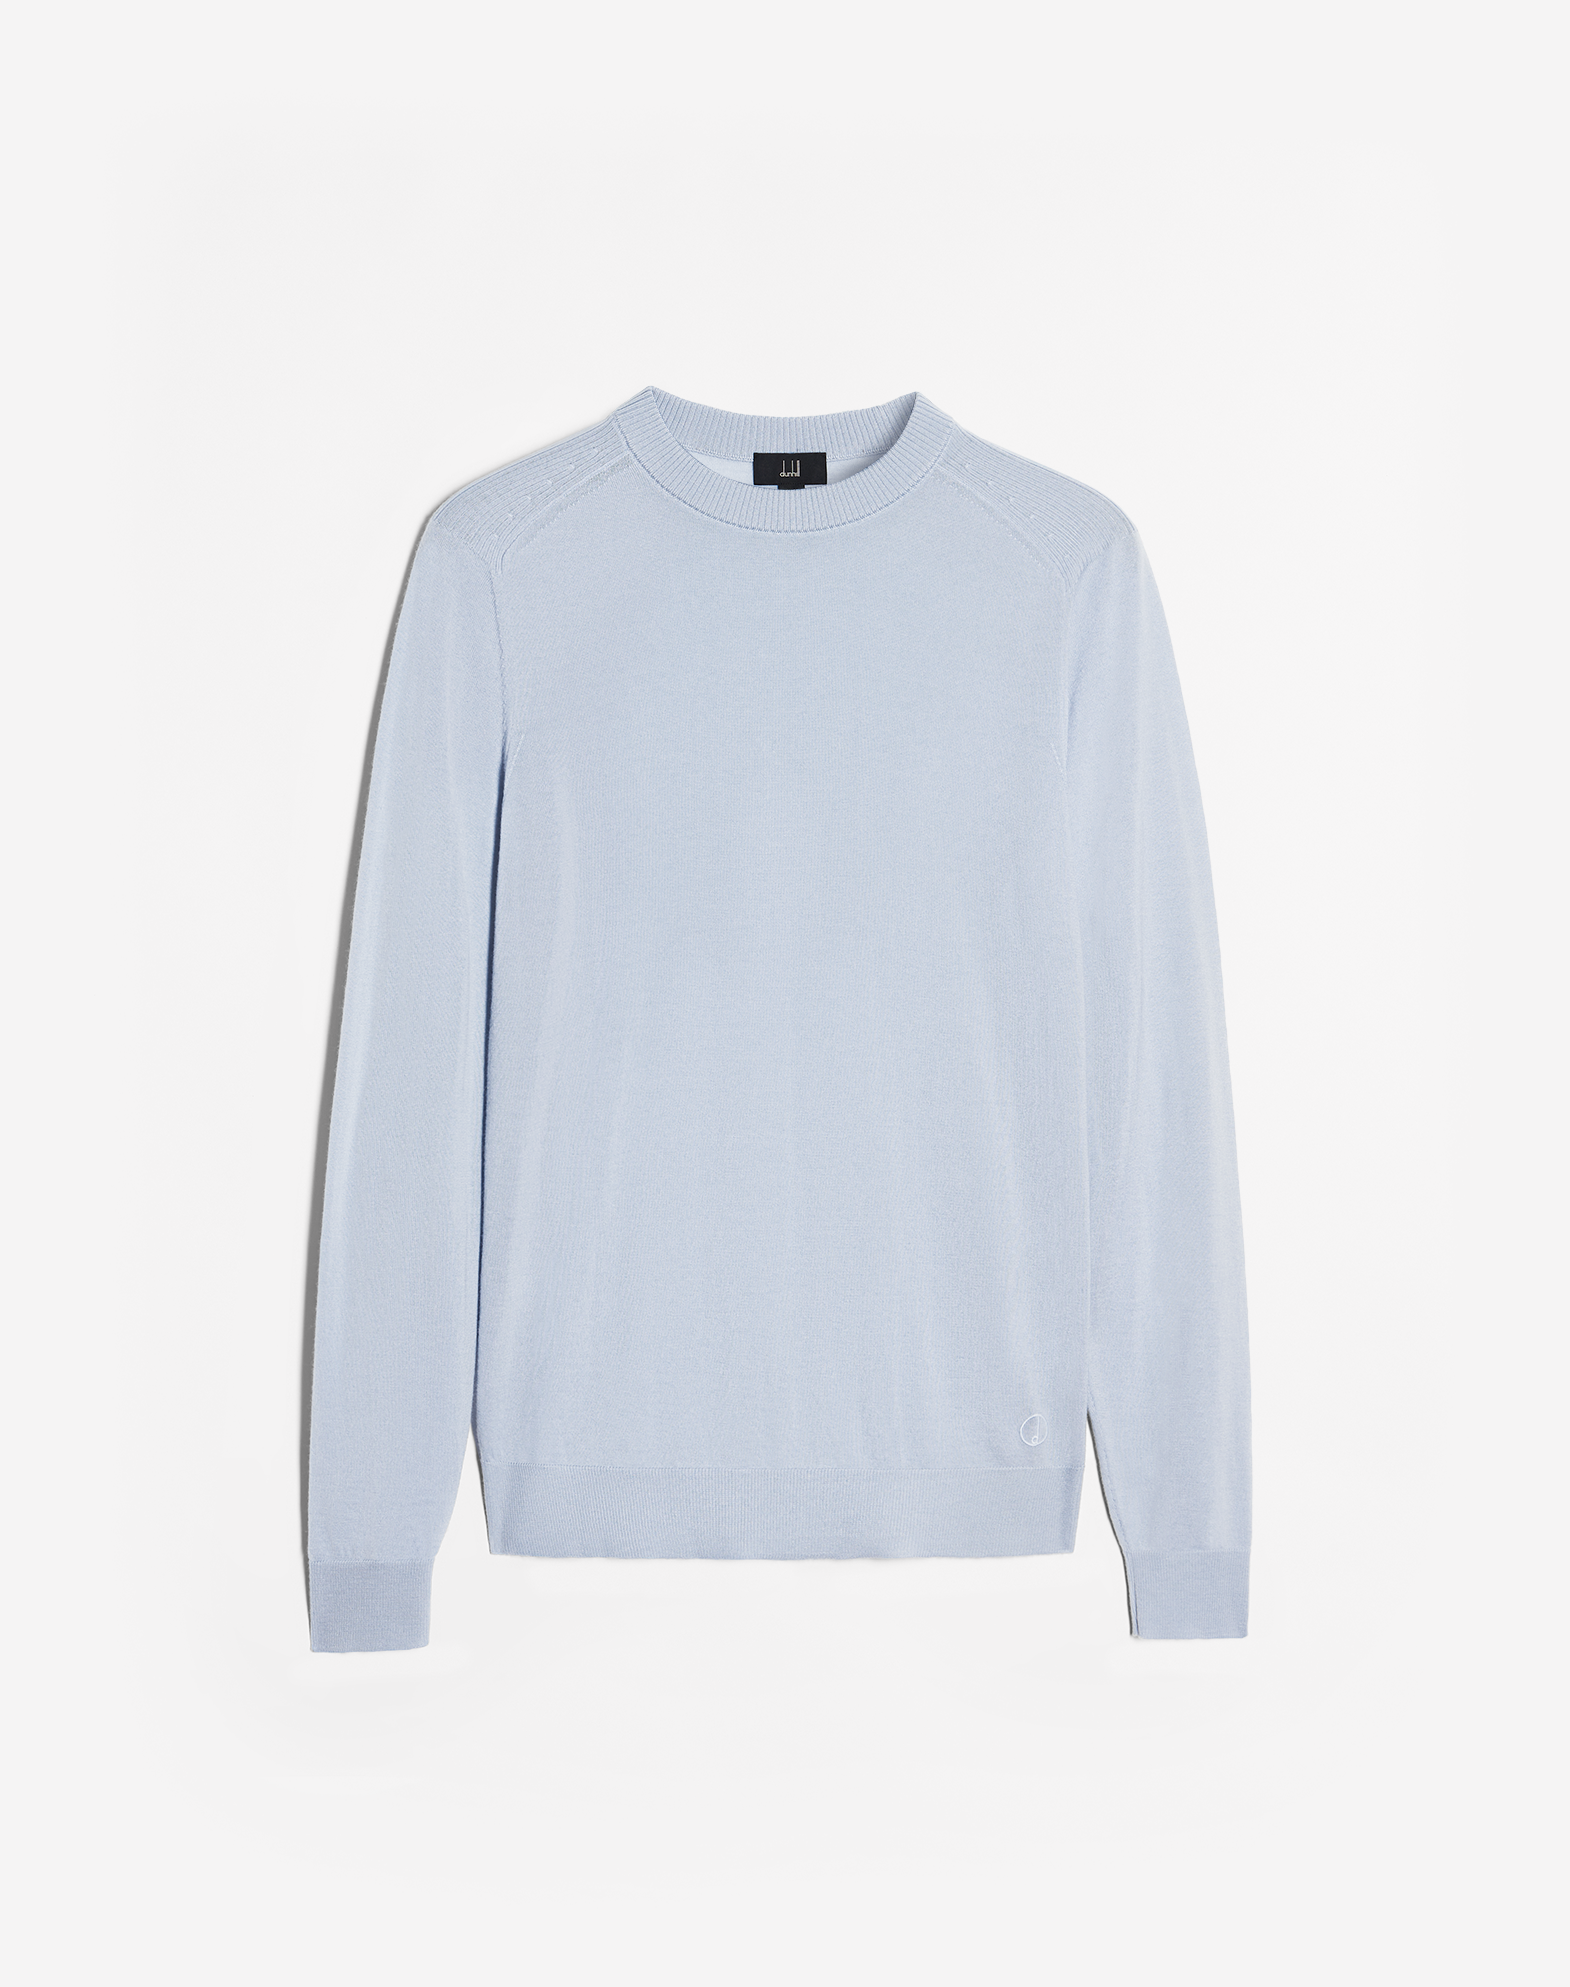 Dunhill Luxury Men's Jumpers